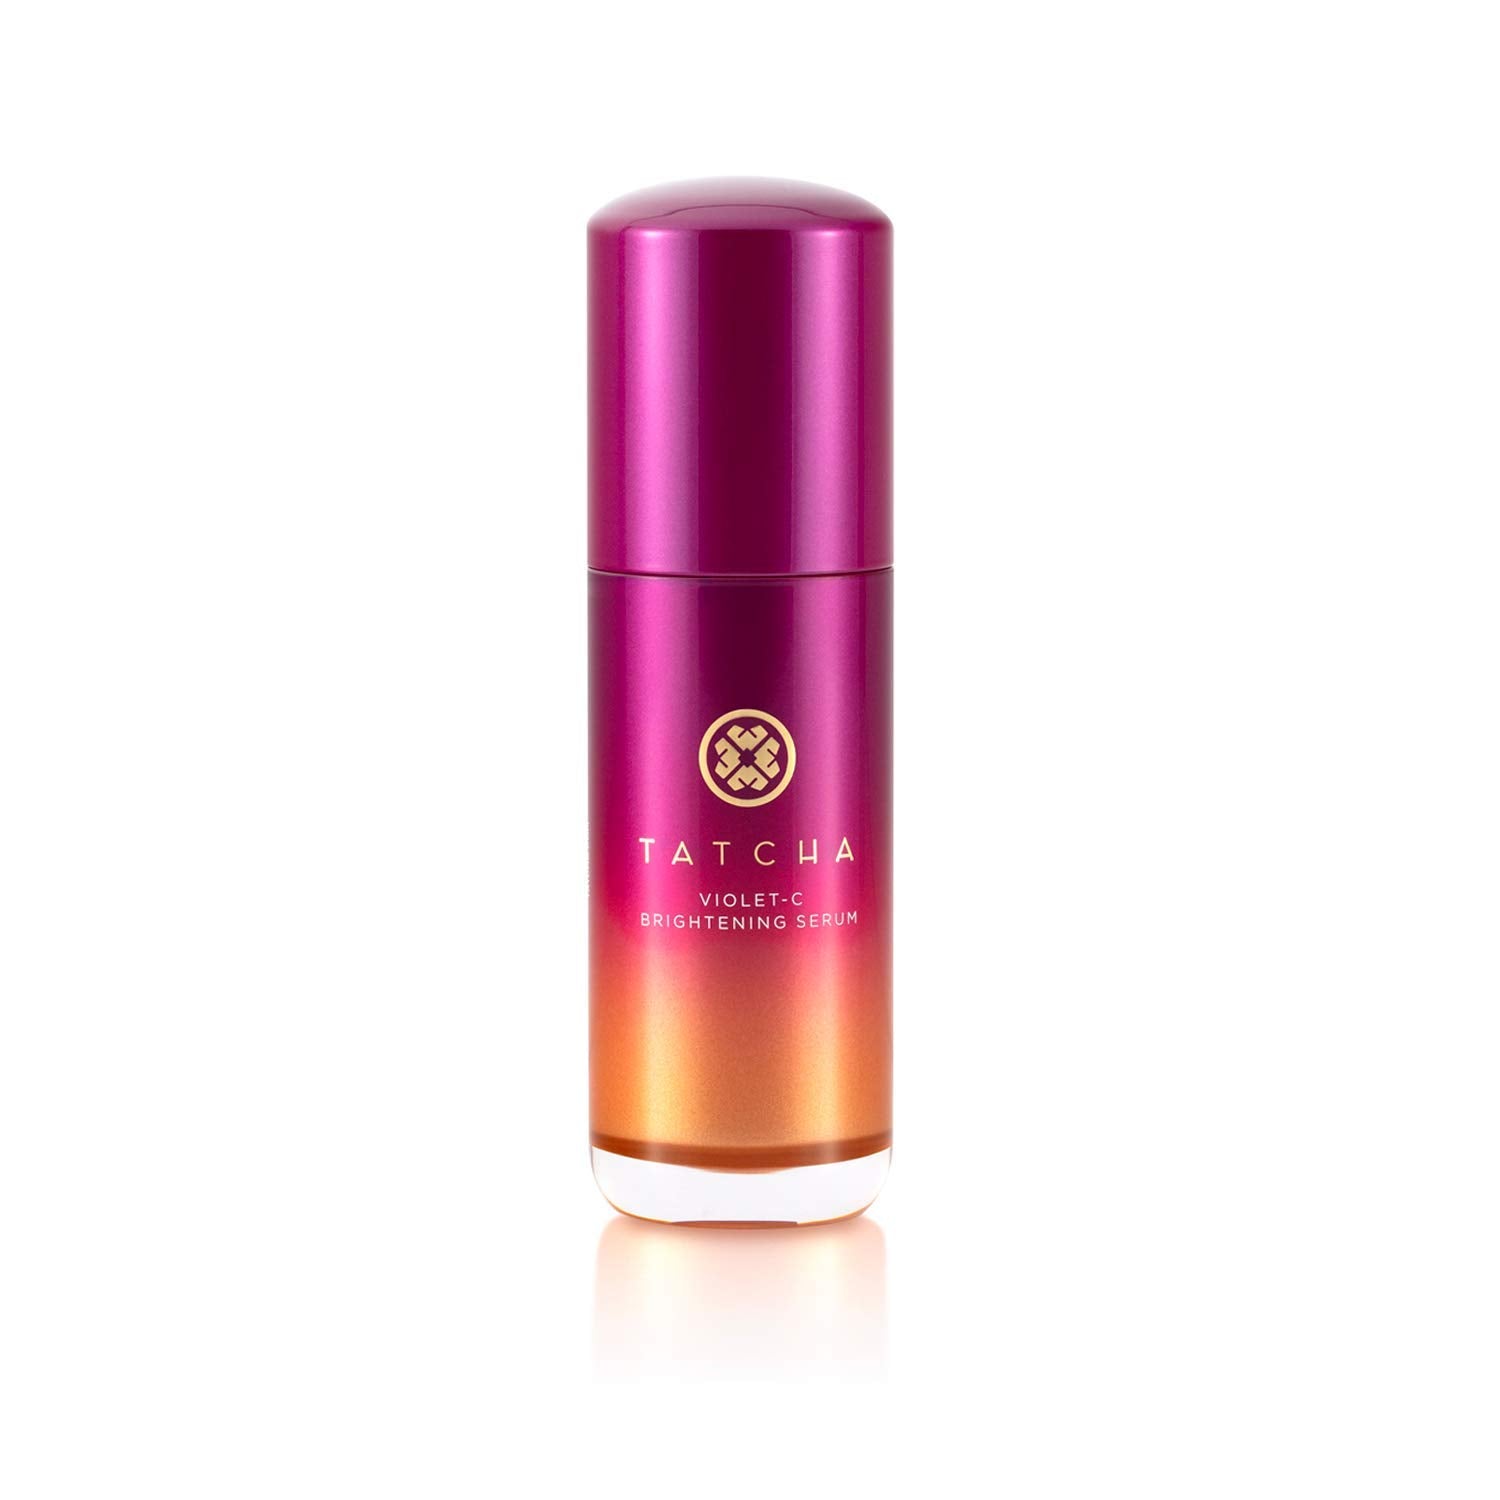 Tatcha Violet-C Brightening Serum: Skin Smoothing Serum with VITAMIN C for Acne Scars and Dark Spots